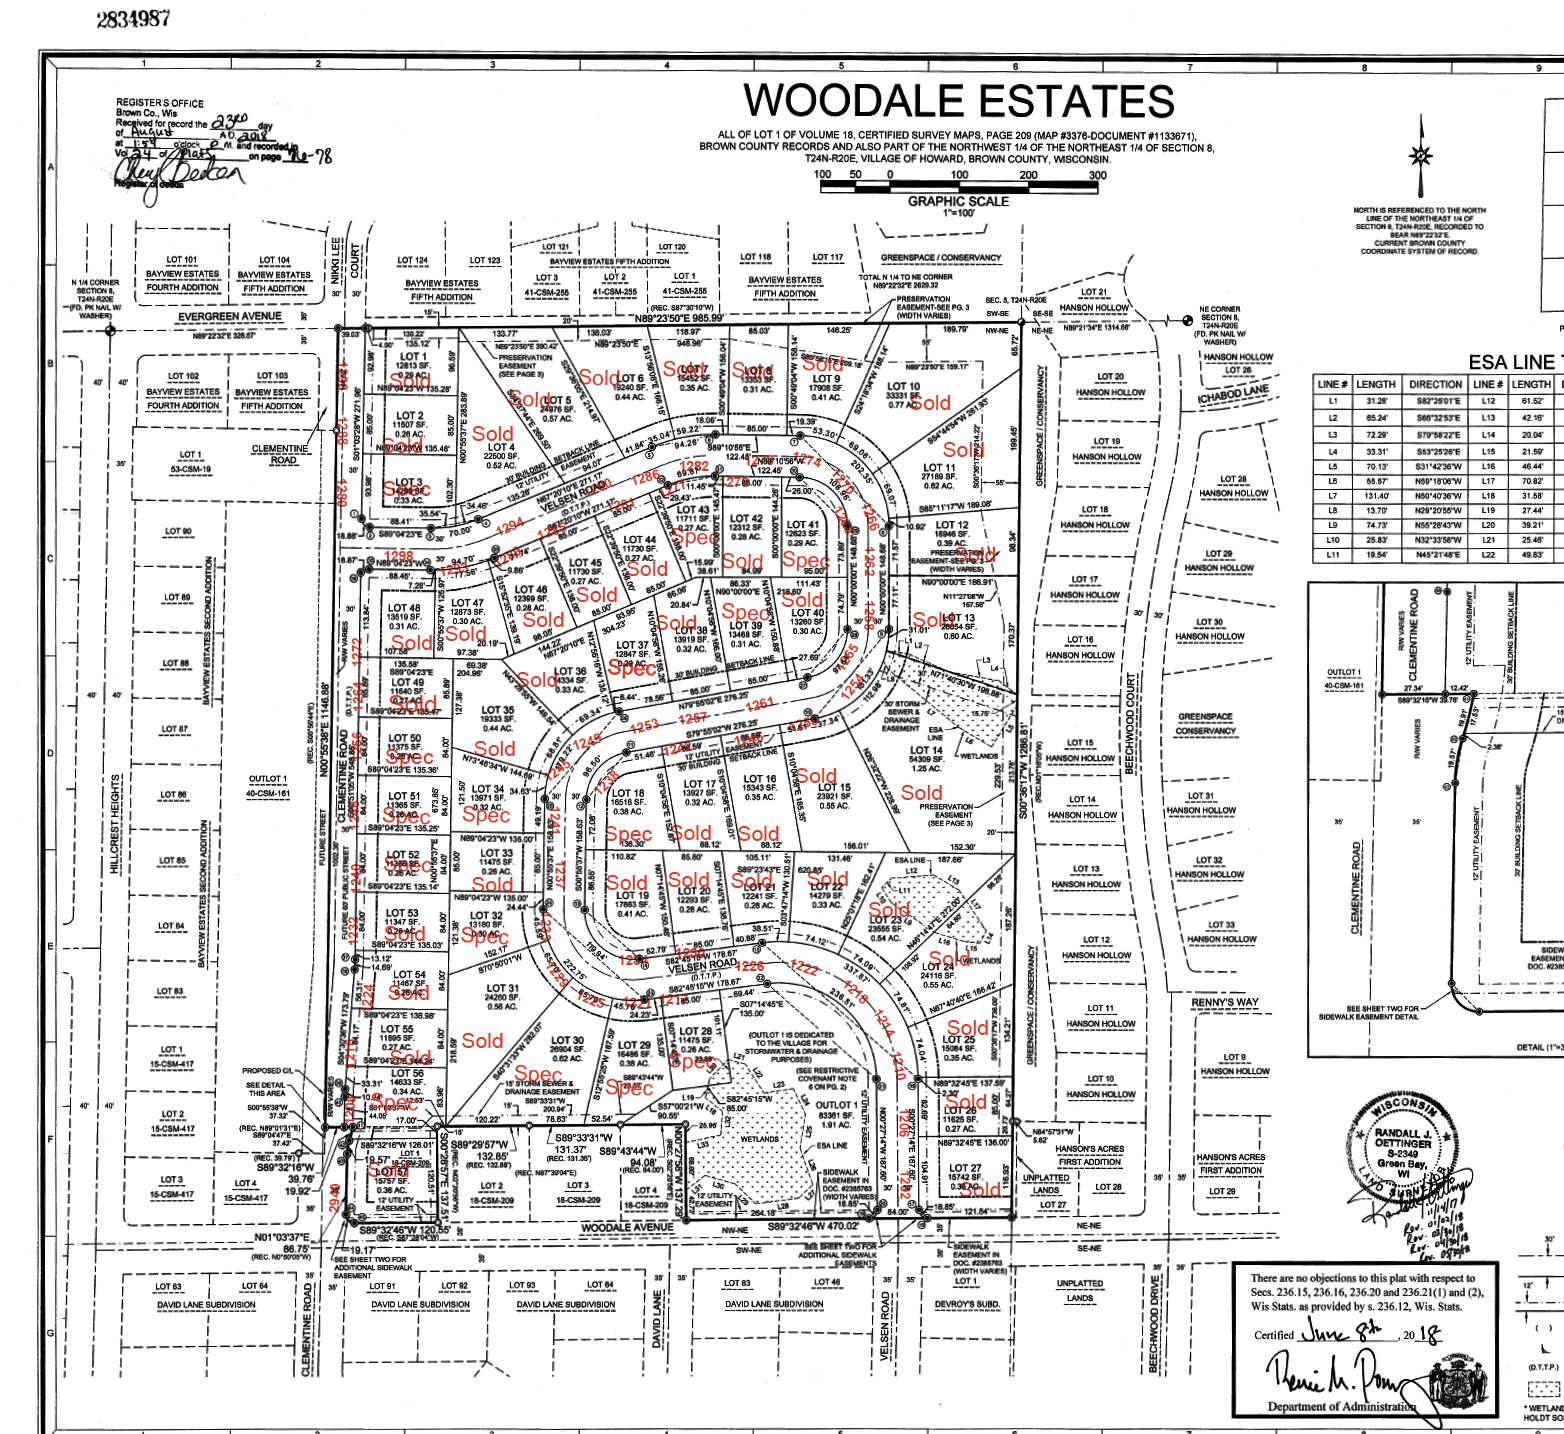 Available Lots Woodale Estates 1 24 22